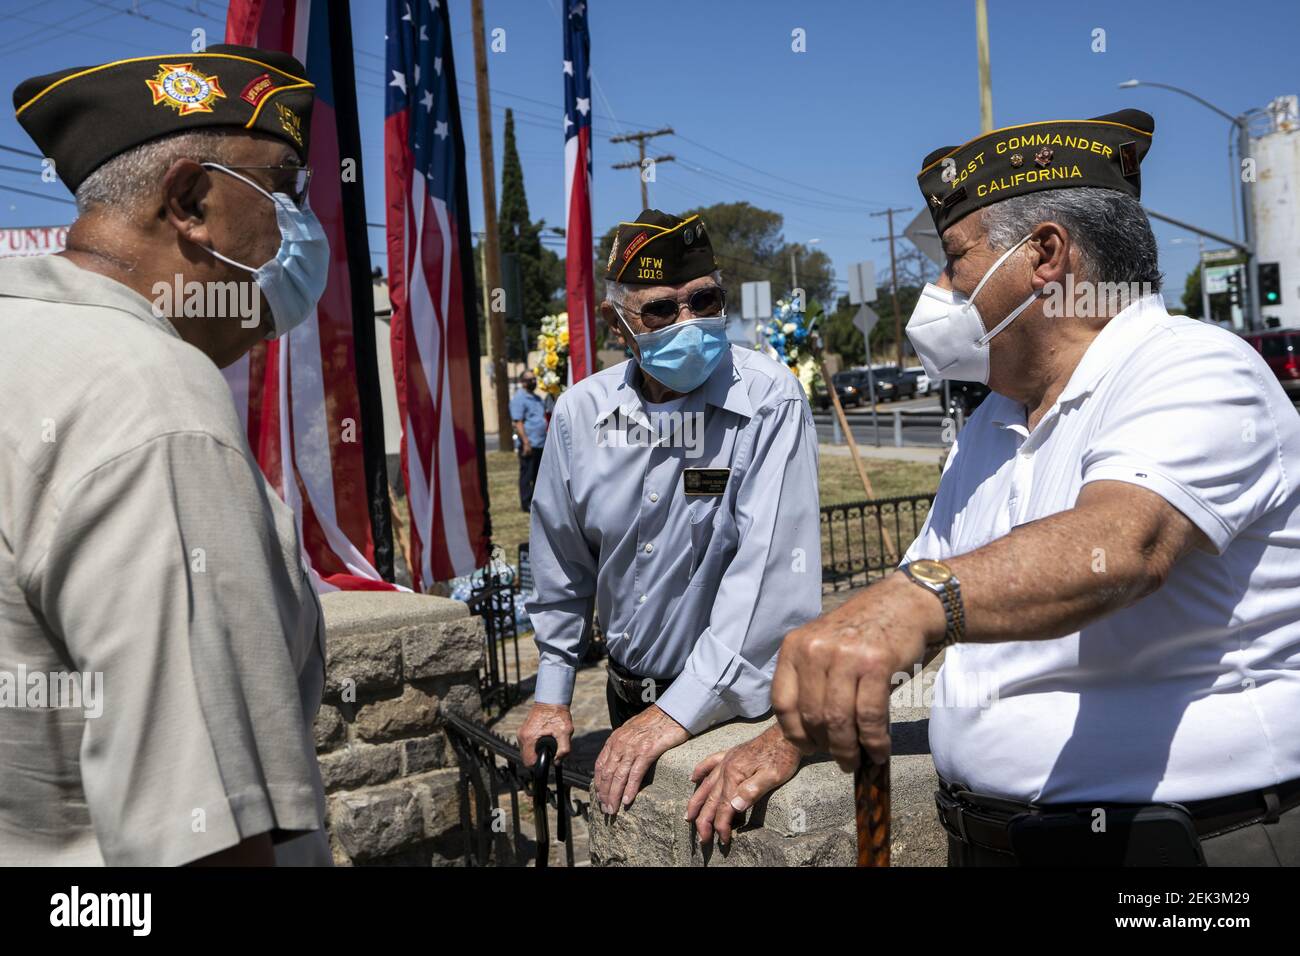 Veterans wearing face masks due to the COVID 19 pandemic attend a Memorial Day ceremony in Los Angeles, California on May 25, 2020. The event took place at the Los Cinco Puntos/Five Points Memorial that honors Mexican American soldiers who died in World War II, the Korean War, and the Vietnam War. (Photo by Ronen Tivony/Sipa USA) *** Please Use Credit from Credit Field *** Stock Photo